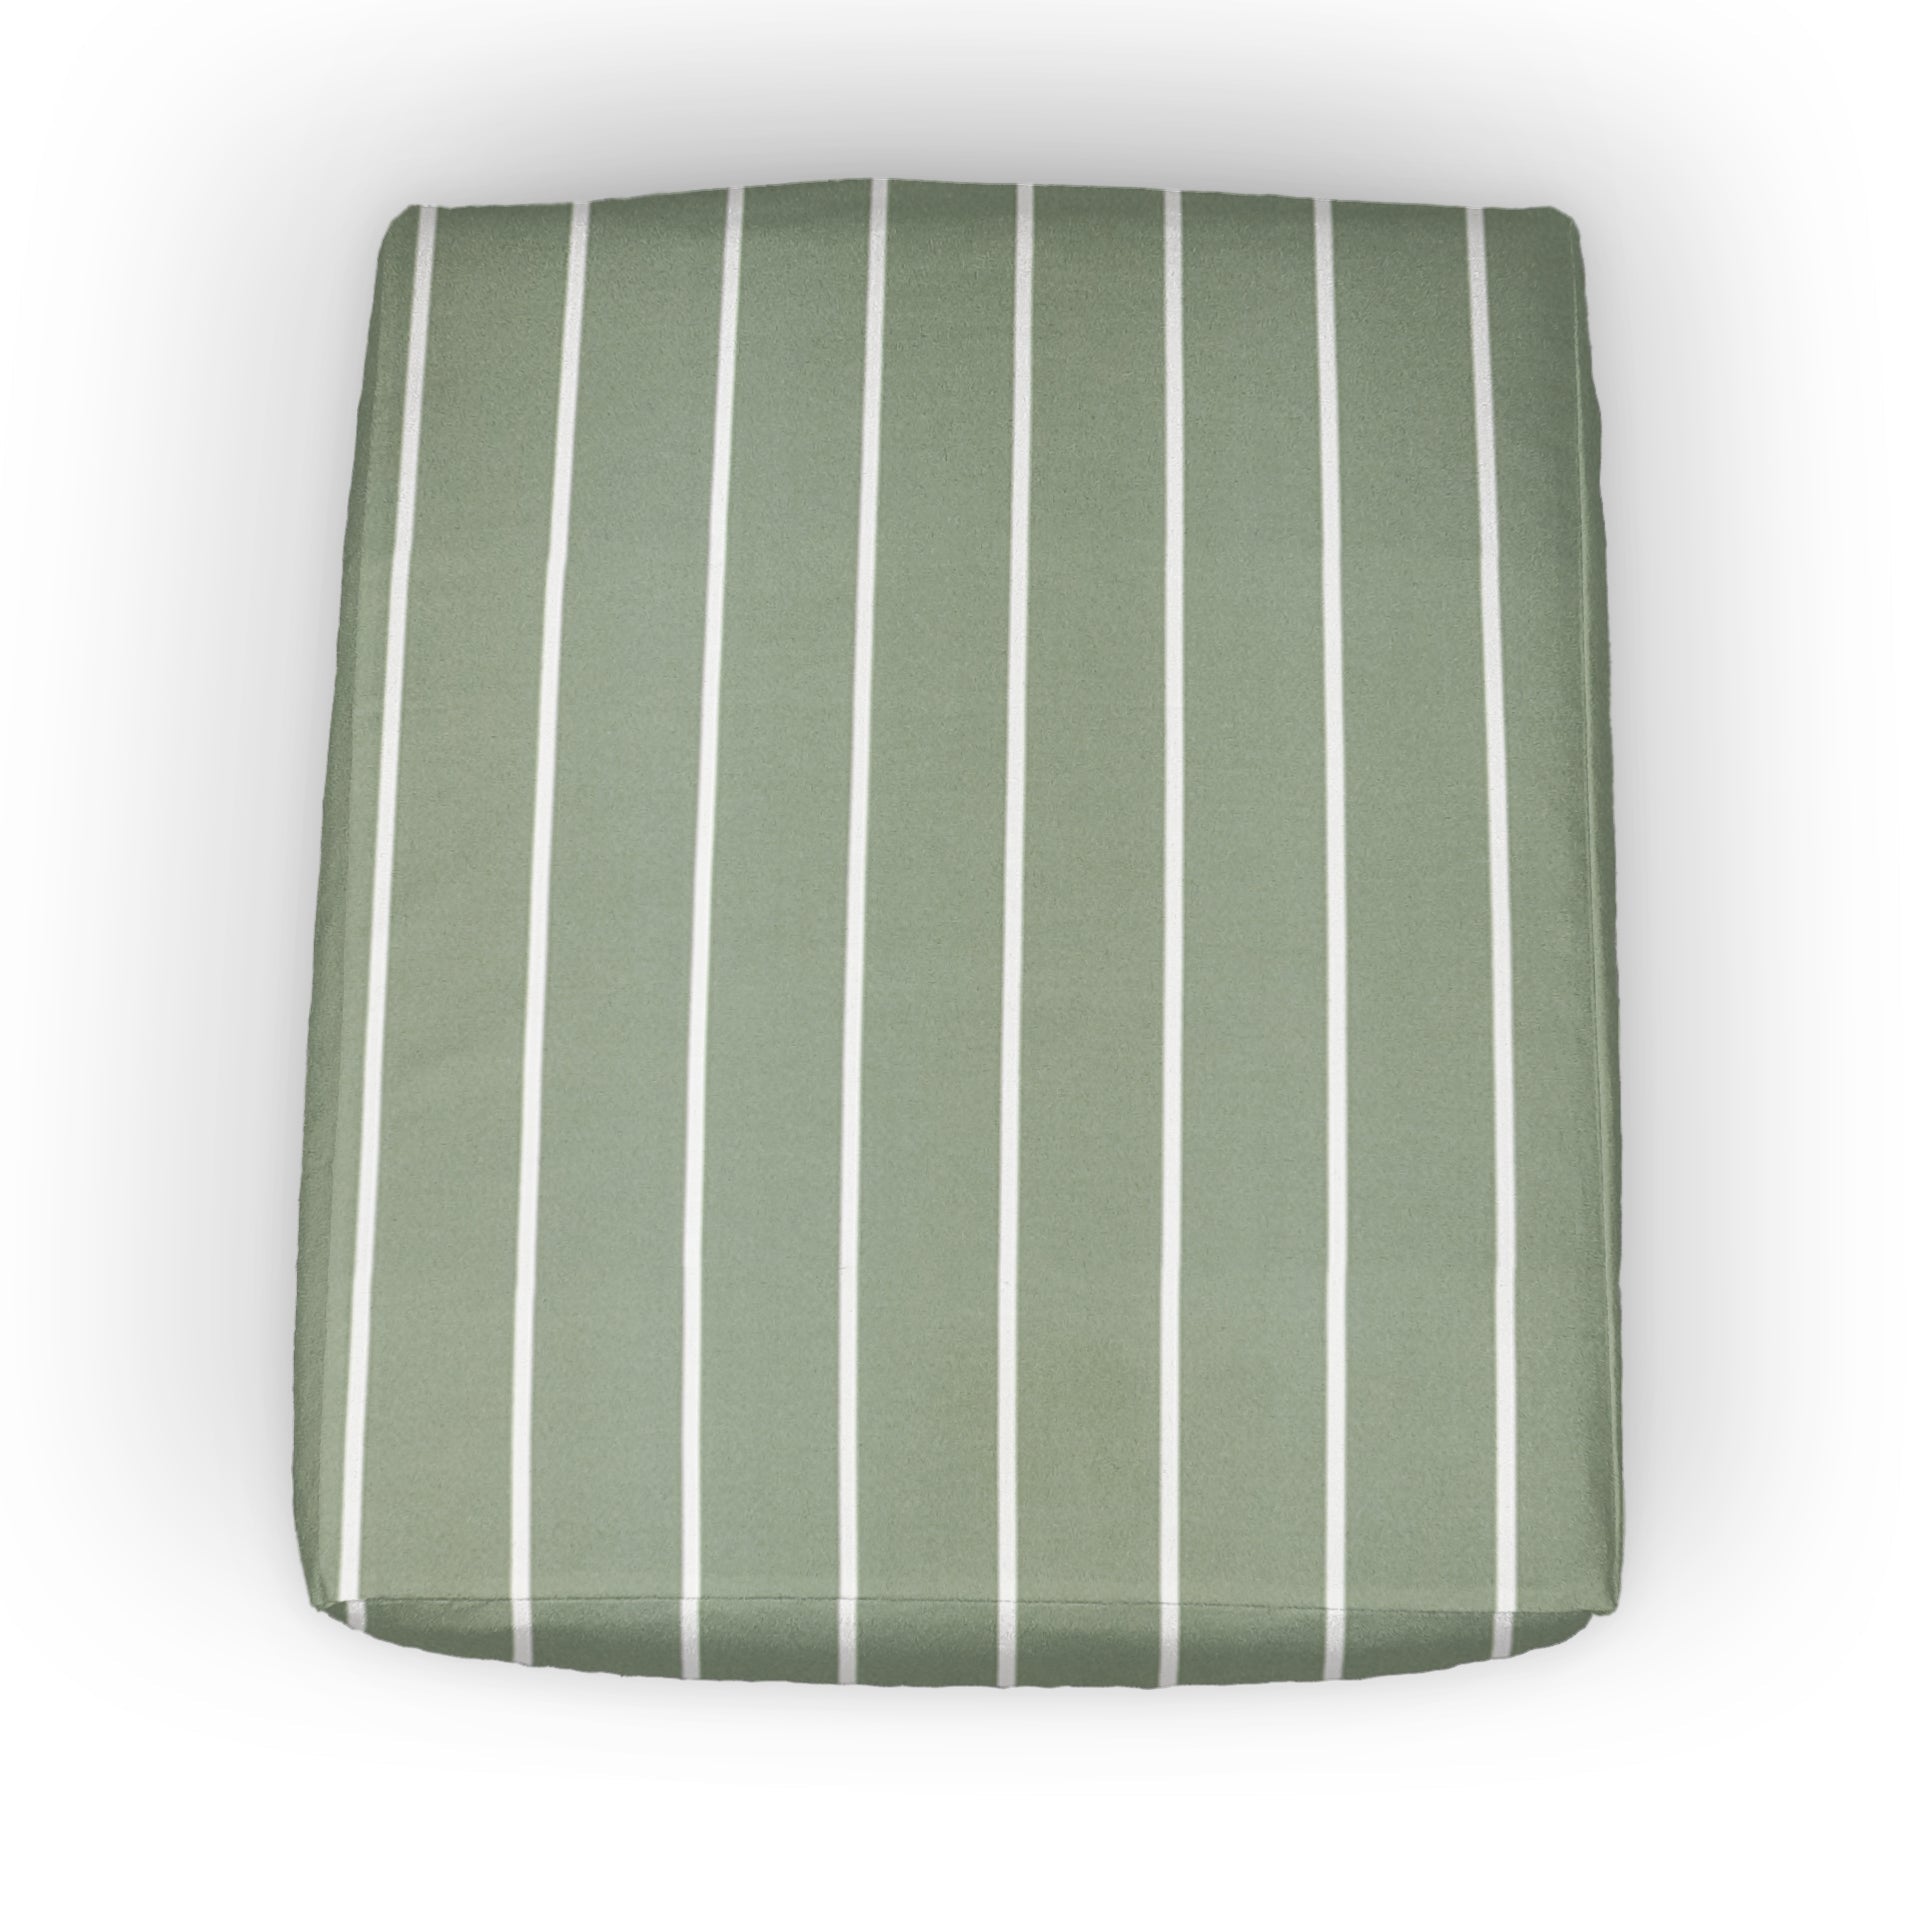 Fabric Sample Only 3x5 inches - Windridge Thin Stripes Custom Water Resistant - Choice of Color